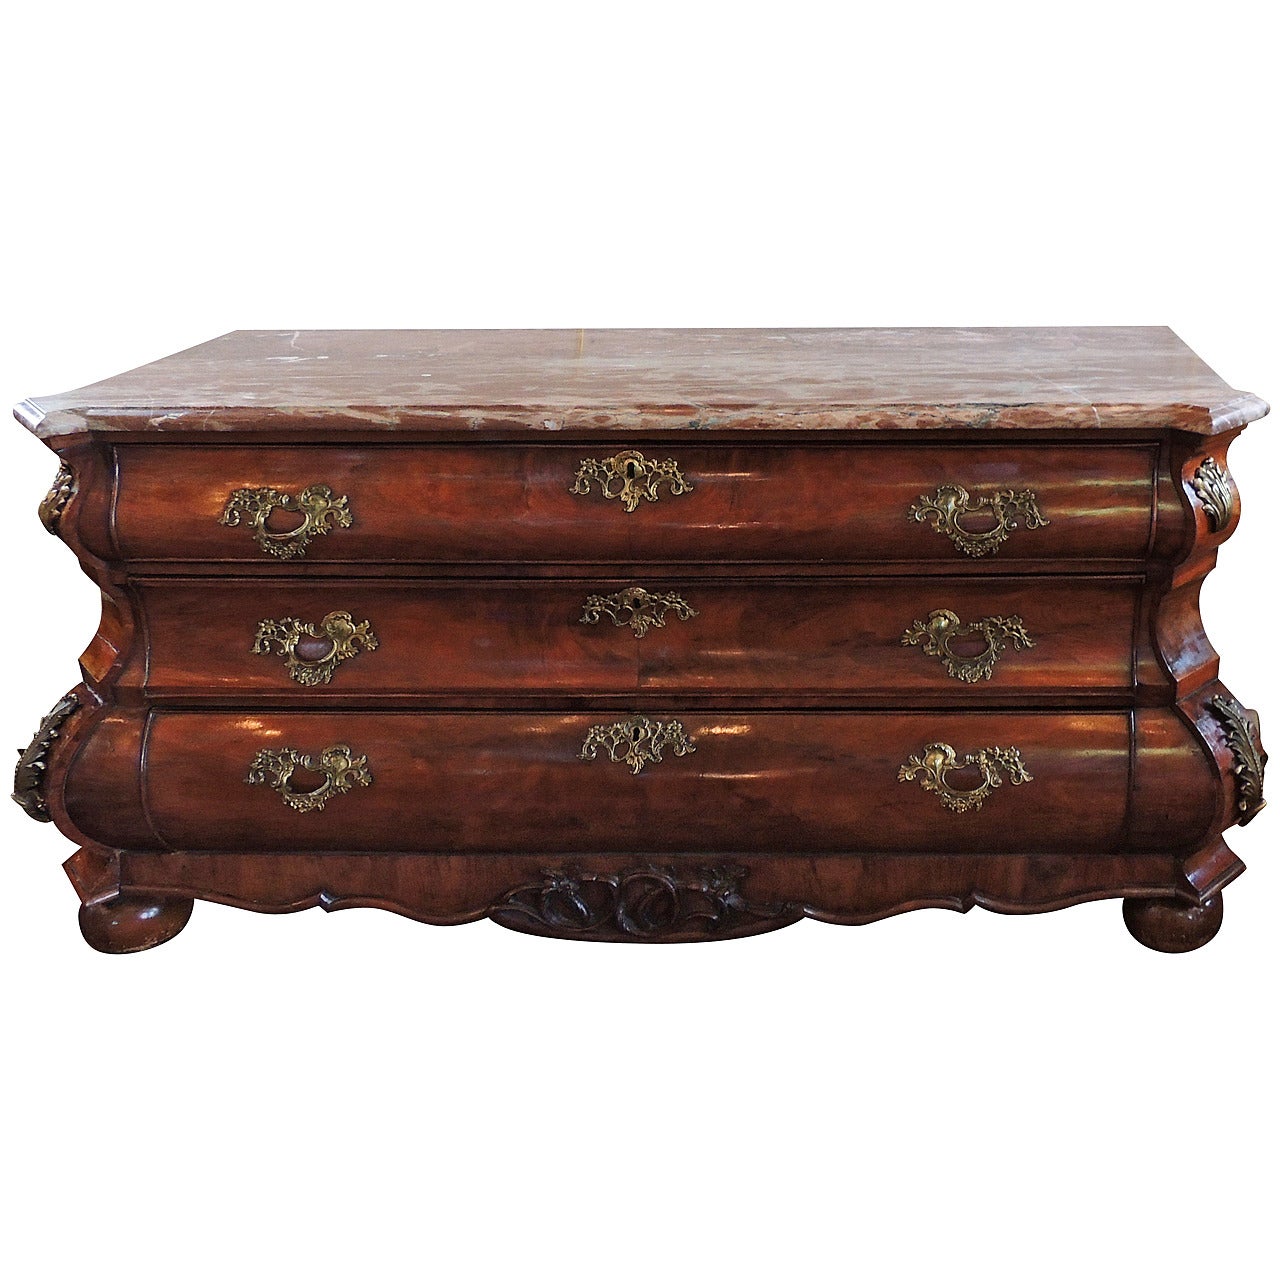 Elegant French Ormolu Bronze-Mounted Mahogany Sideboard Rose Marble-Top For Sale